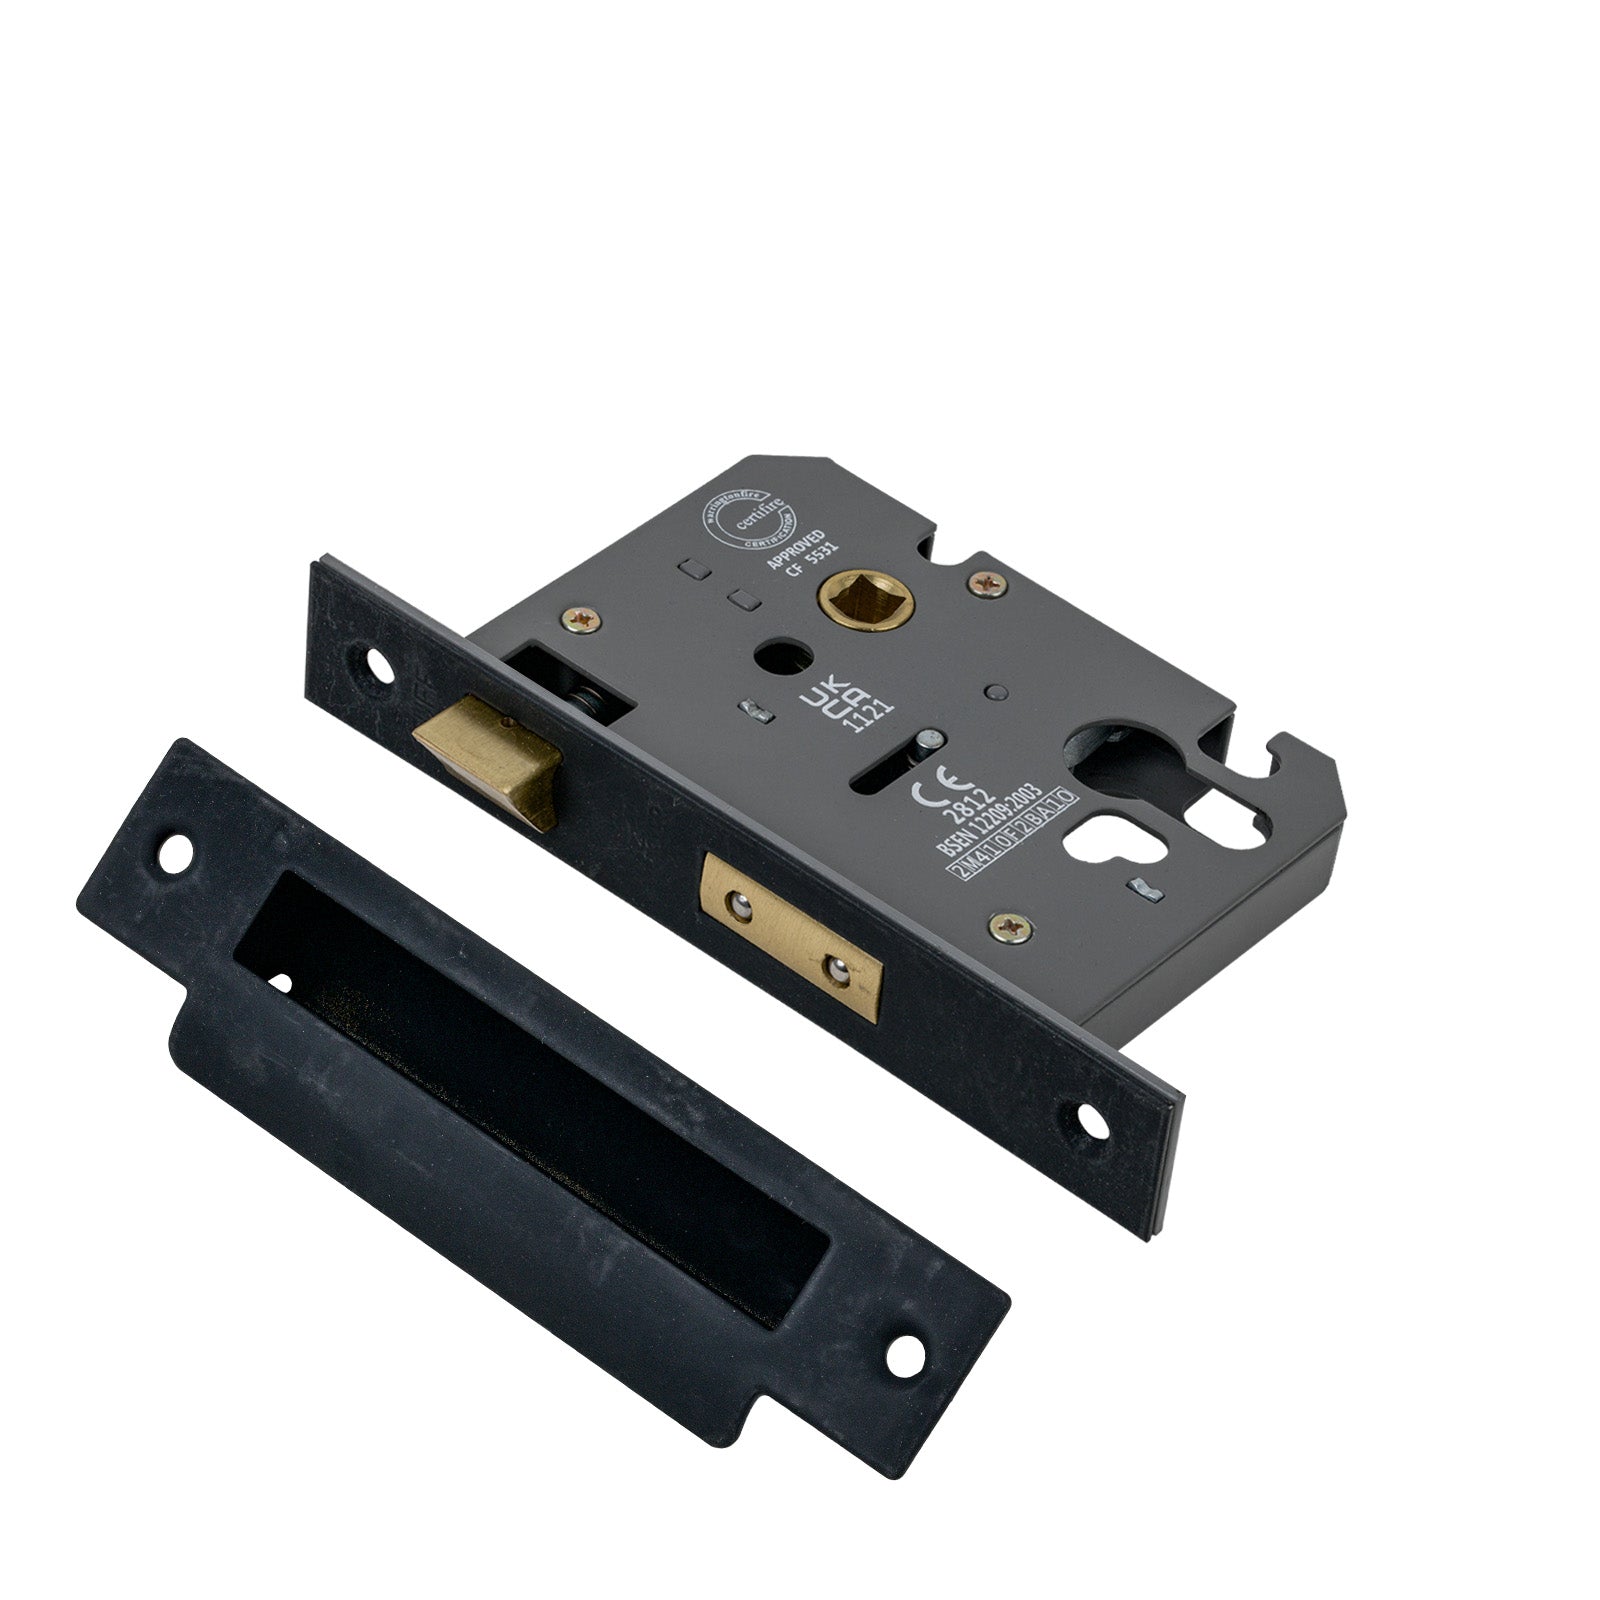 SHOW 3 Lever Euro Sash Lock - 3 Inch with Matt Black finished forend and striker plate